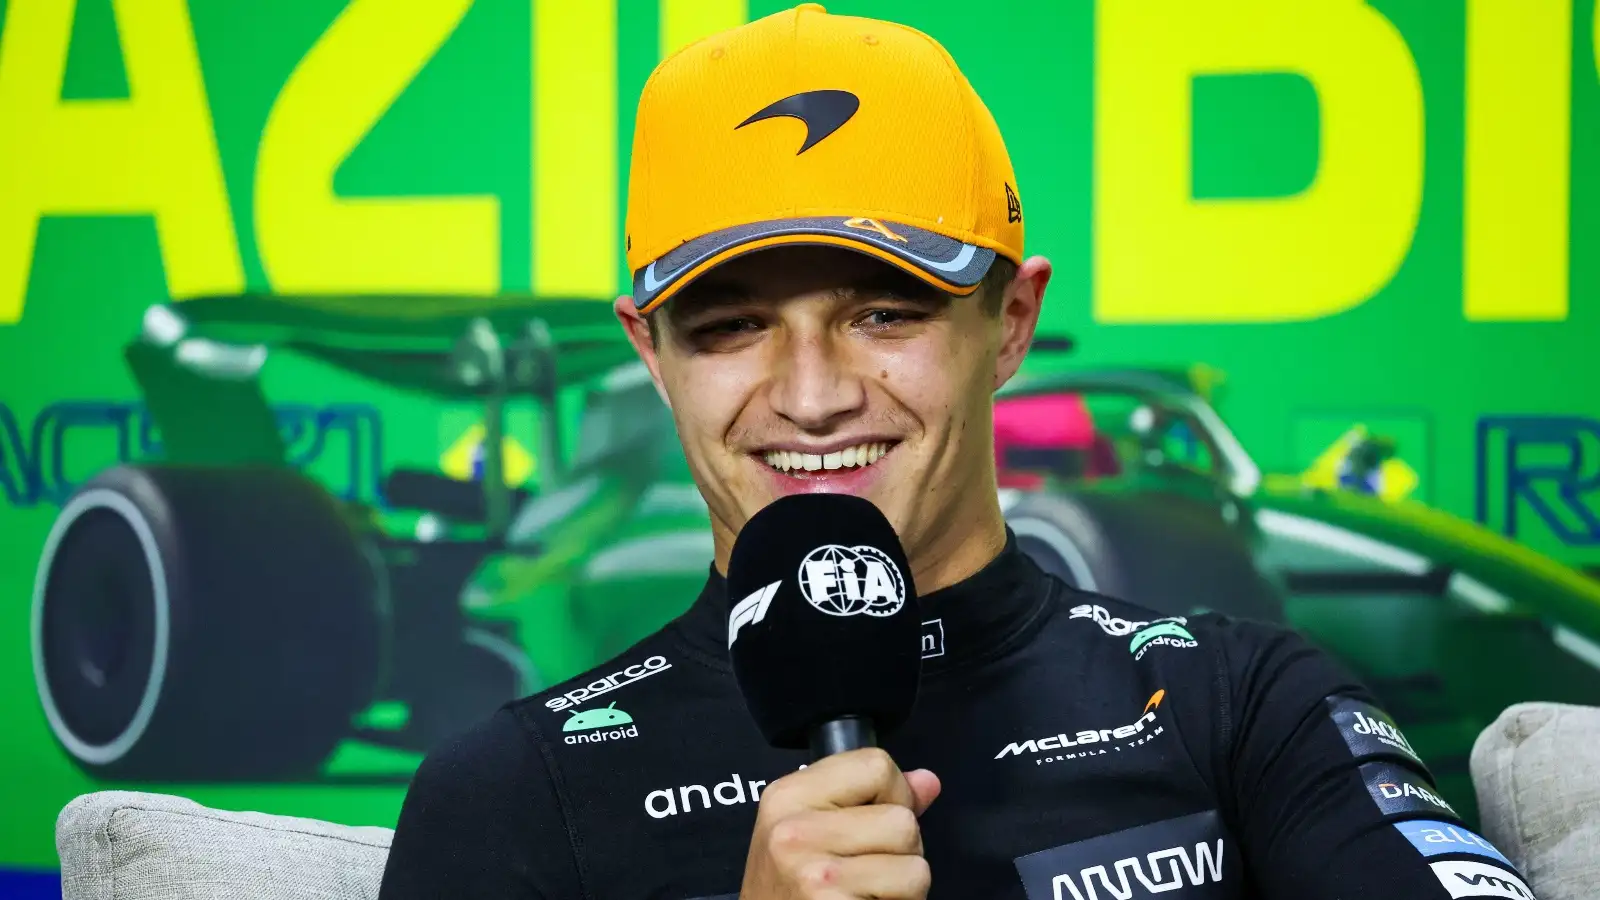 Lando Norris during a press conference.